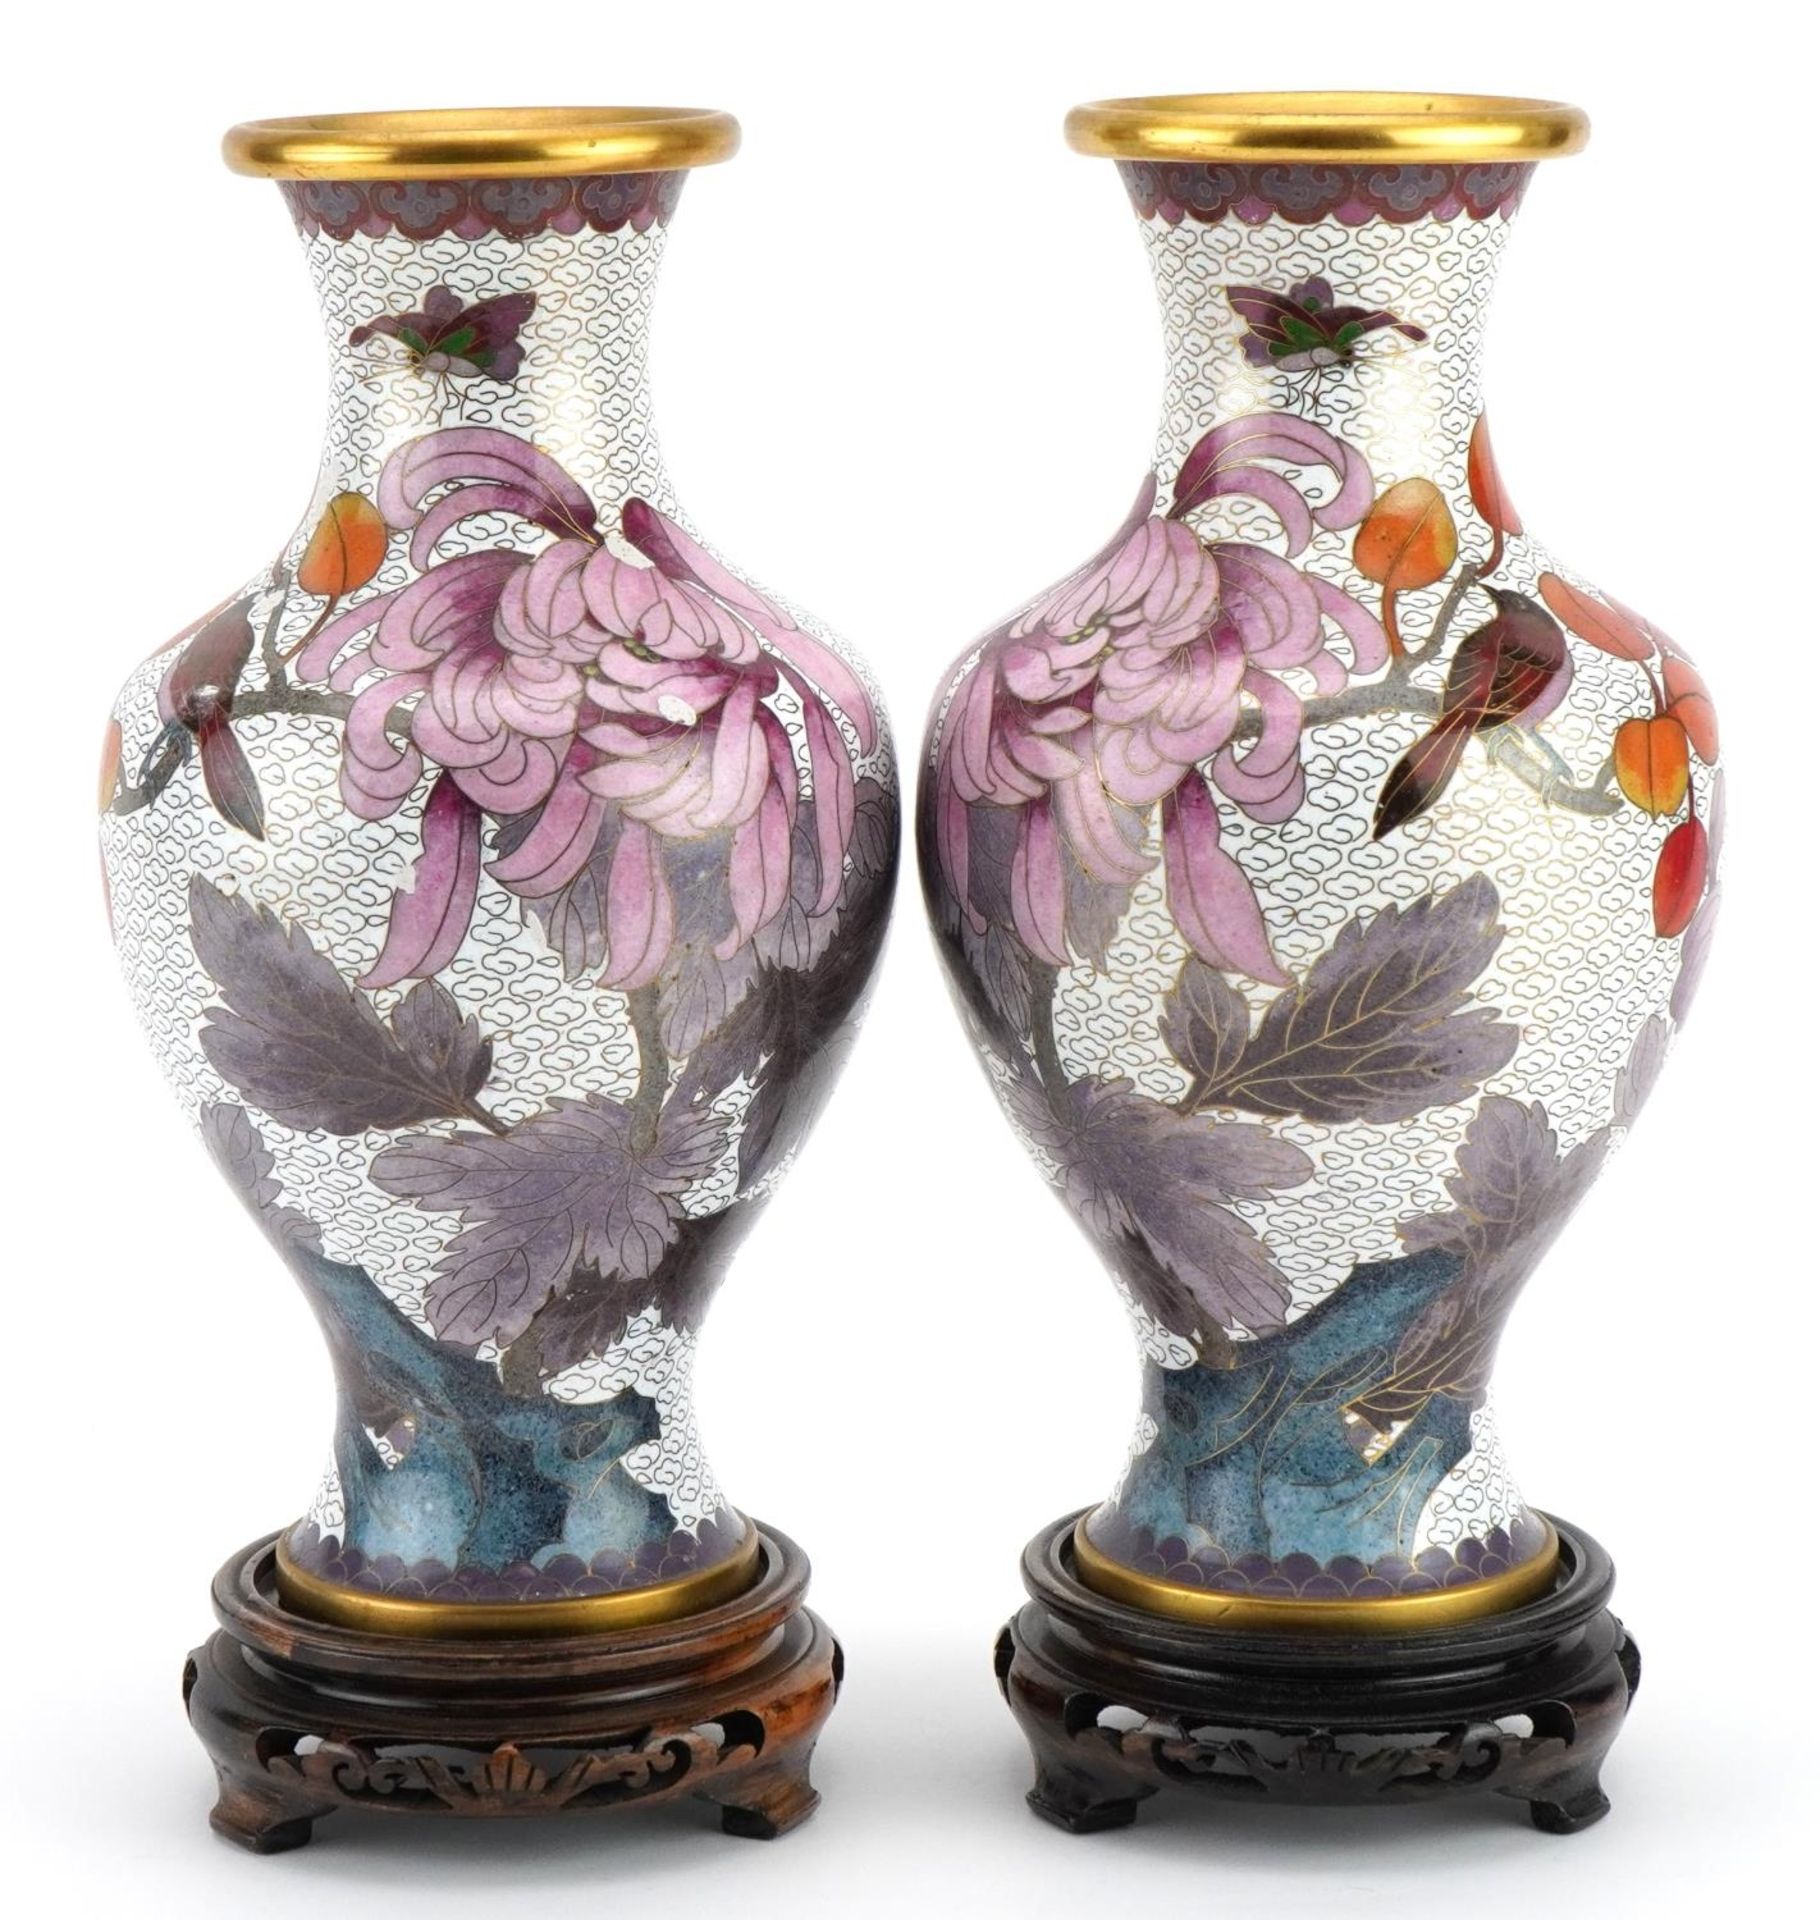 Pair of Chinese cloisonne vases raised on hardwood stands, each enamelled with birds amongst